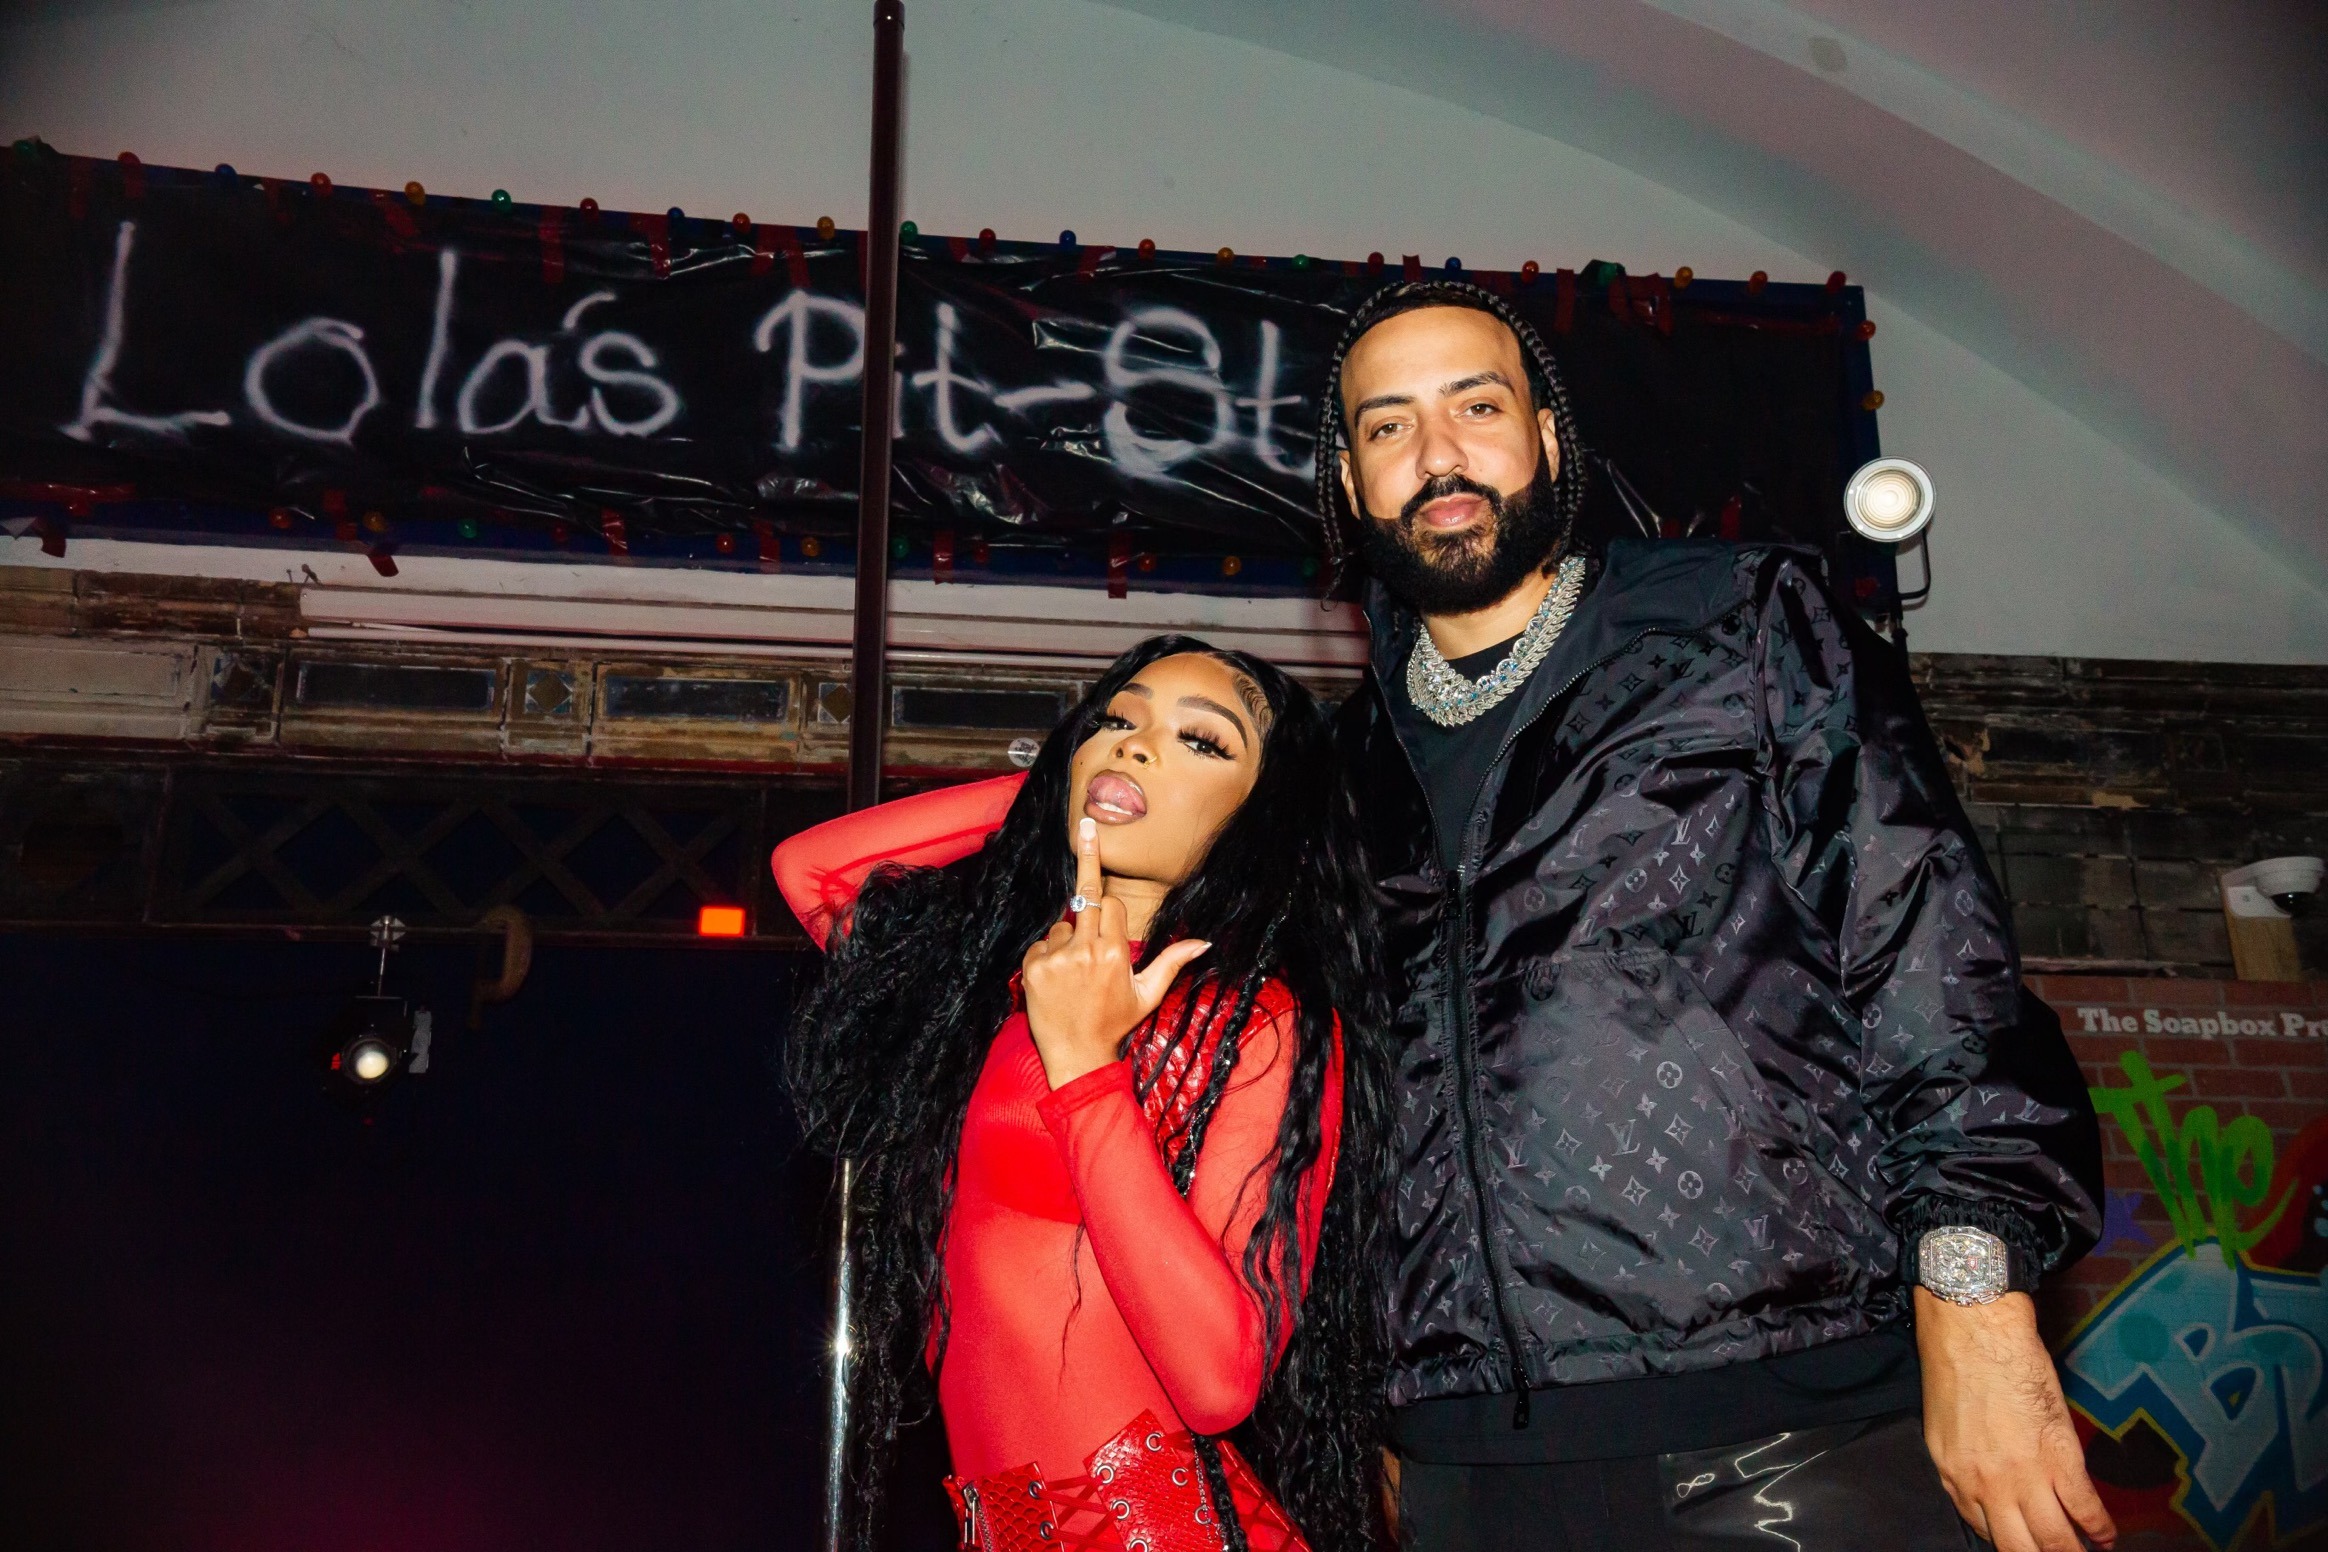  Lola Brooke Pulls Up With New Song “Pit Stop” Featuring French Montana 